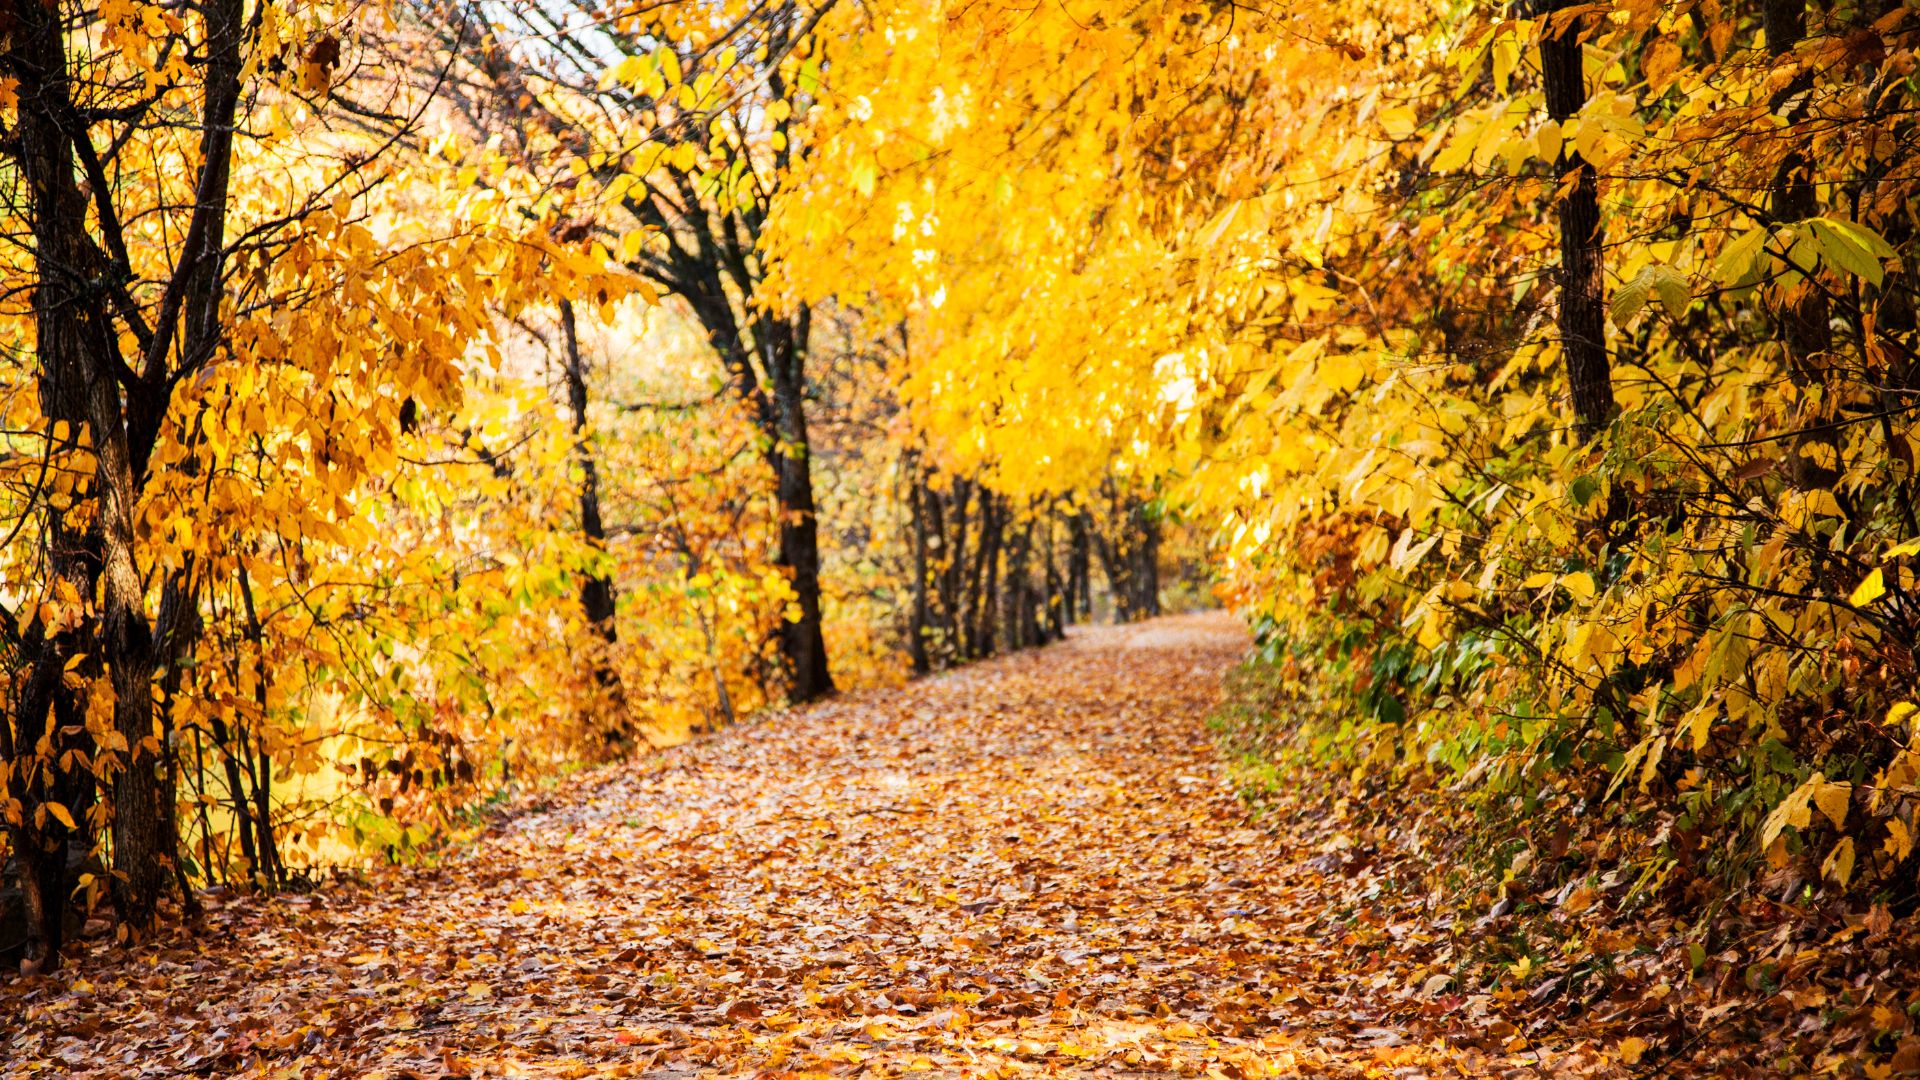 Walking path covered in fallen fall leaves and surrounded by trees with golden fall foliage.